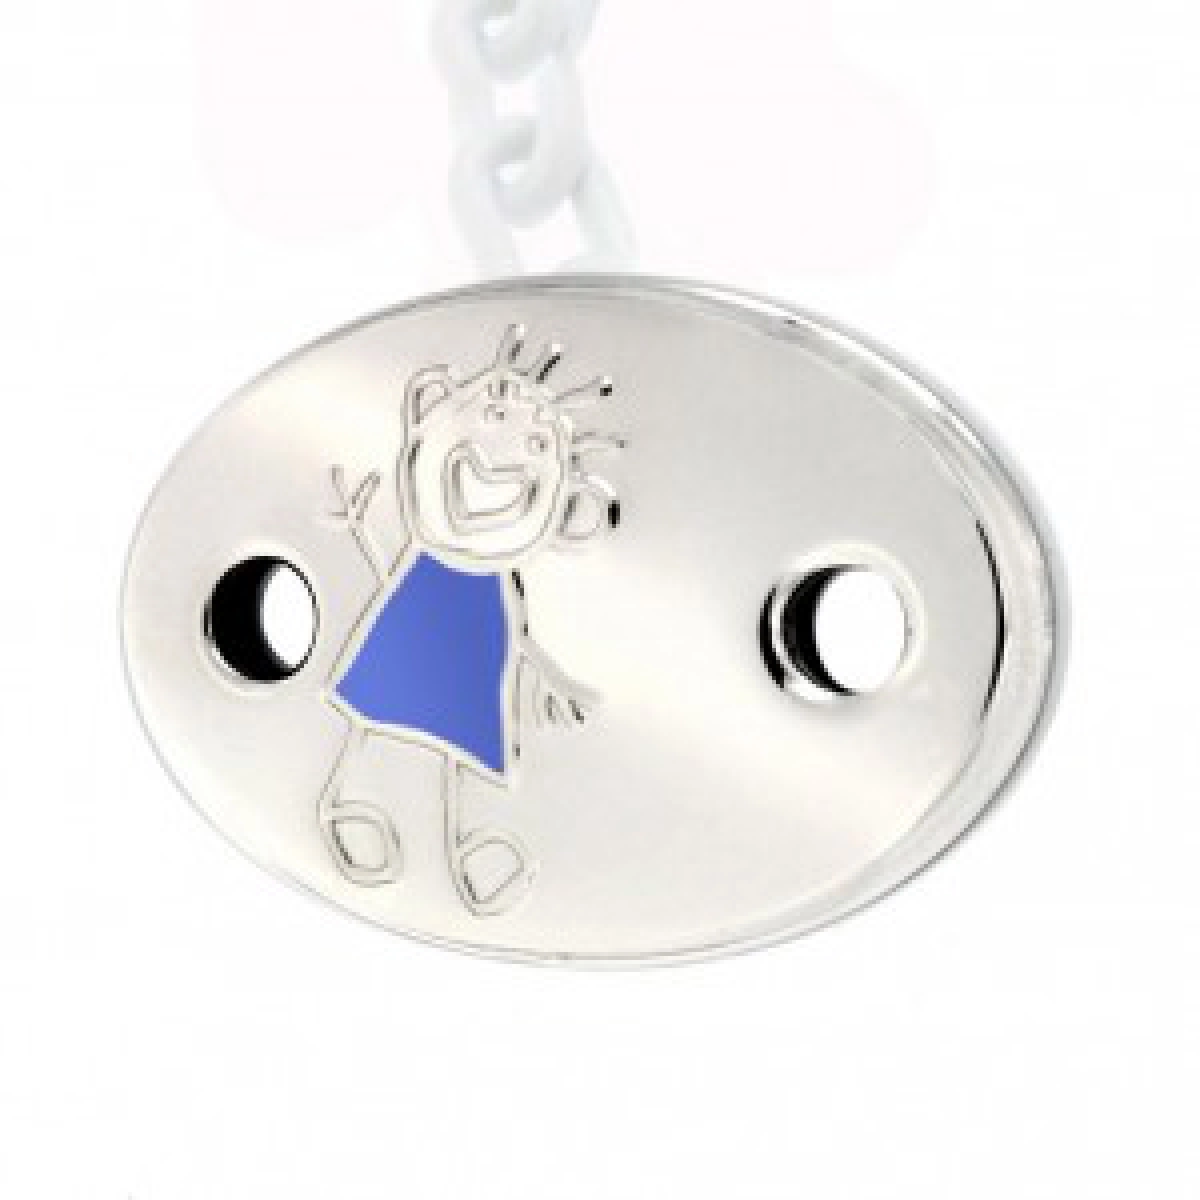 Gift items PINZA FOR PACIFIER SILVER TOTO GLAZED IN BLUE-Craft-900101ES